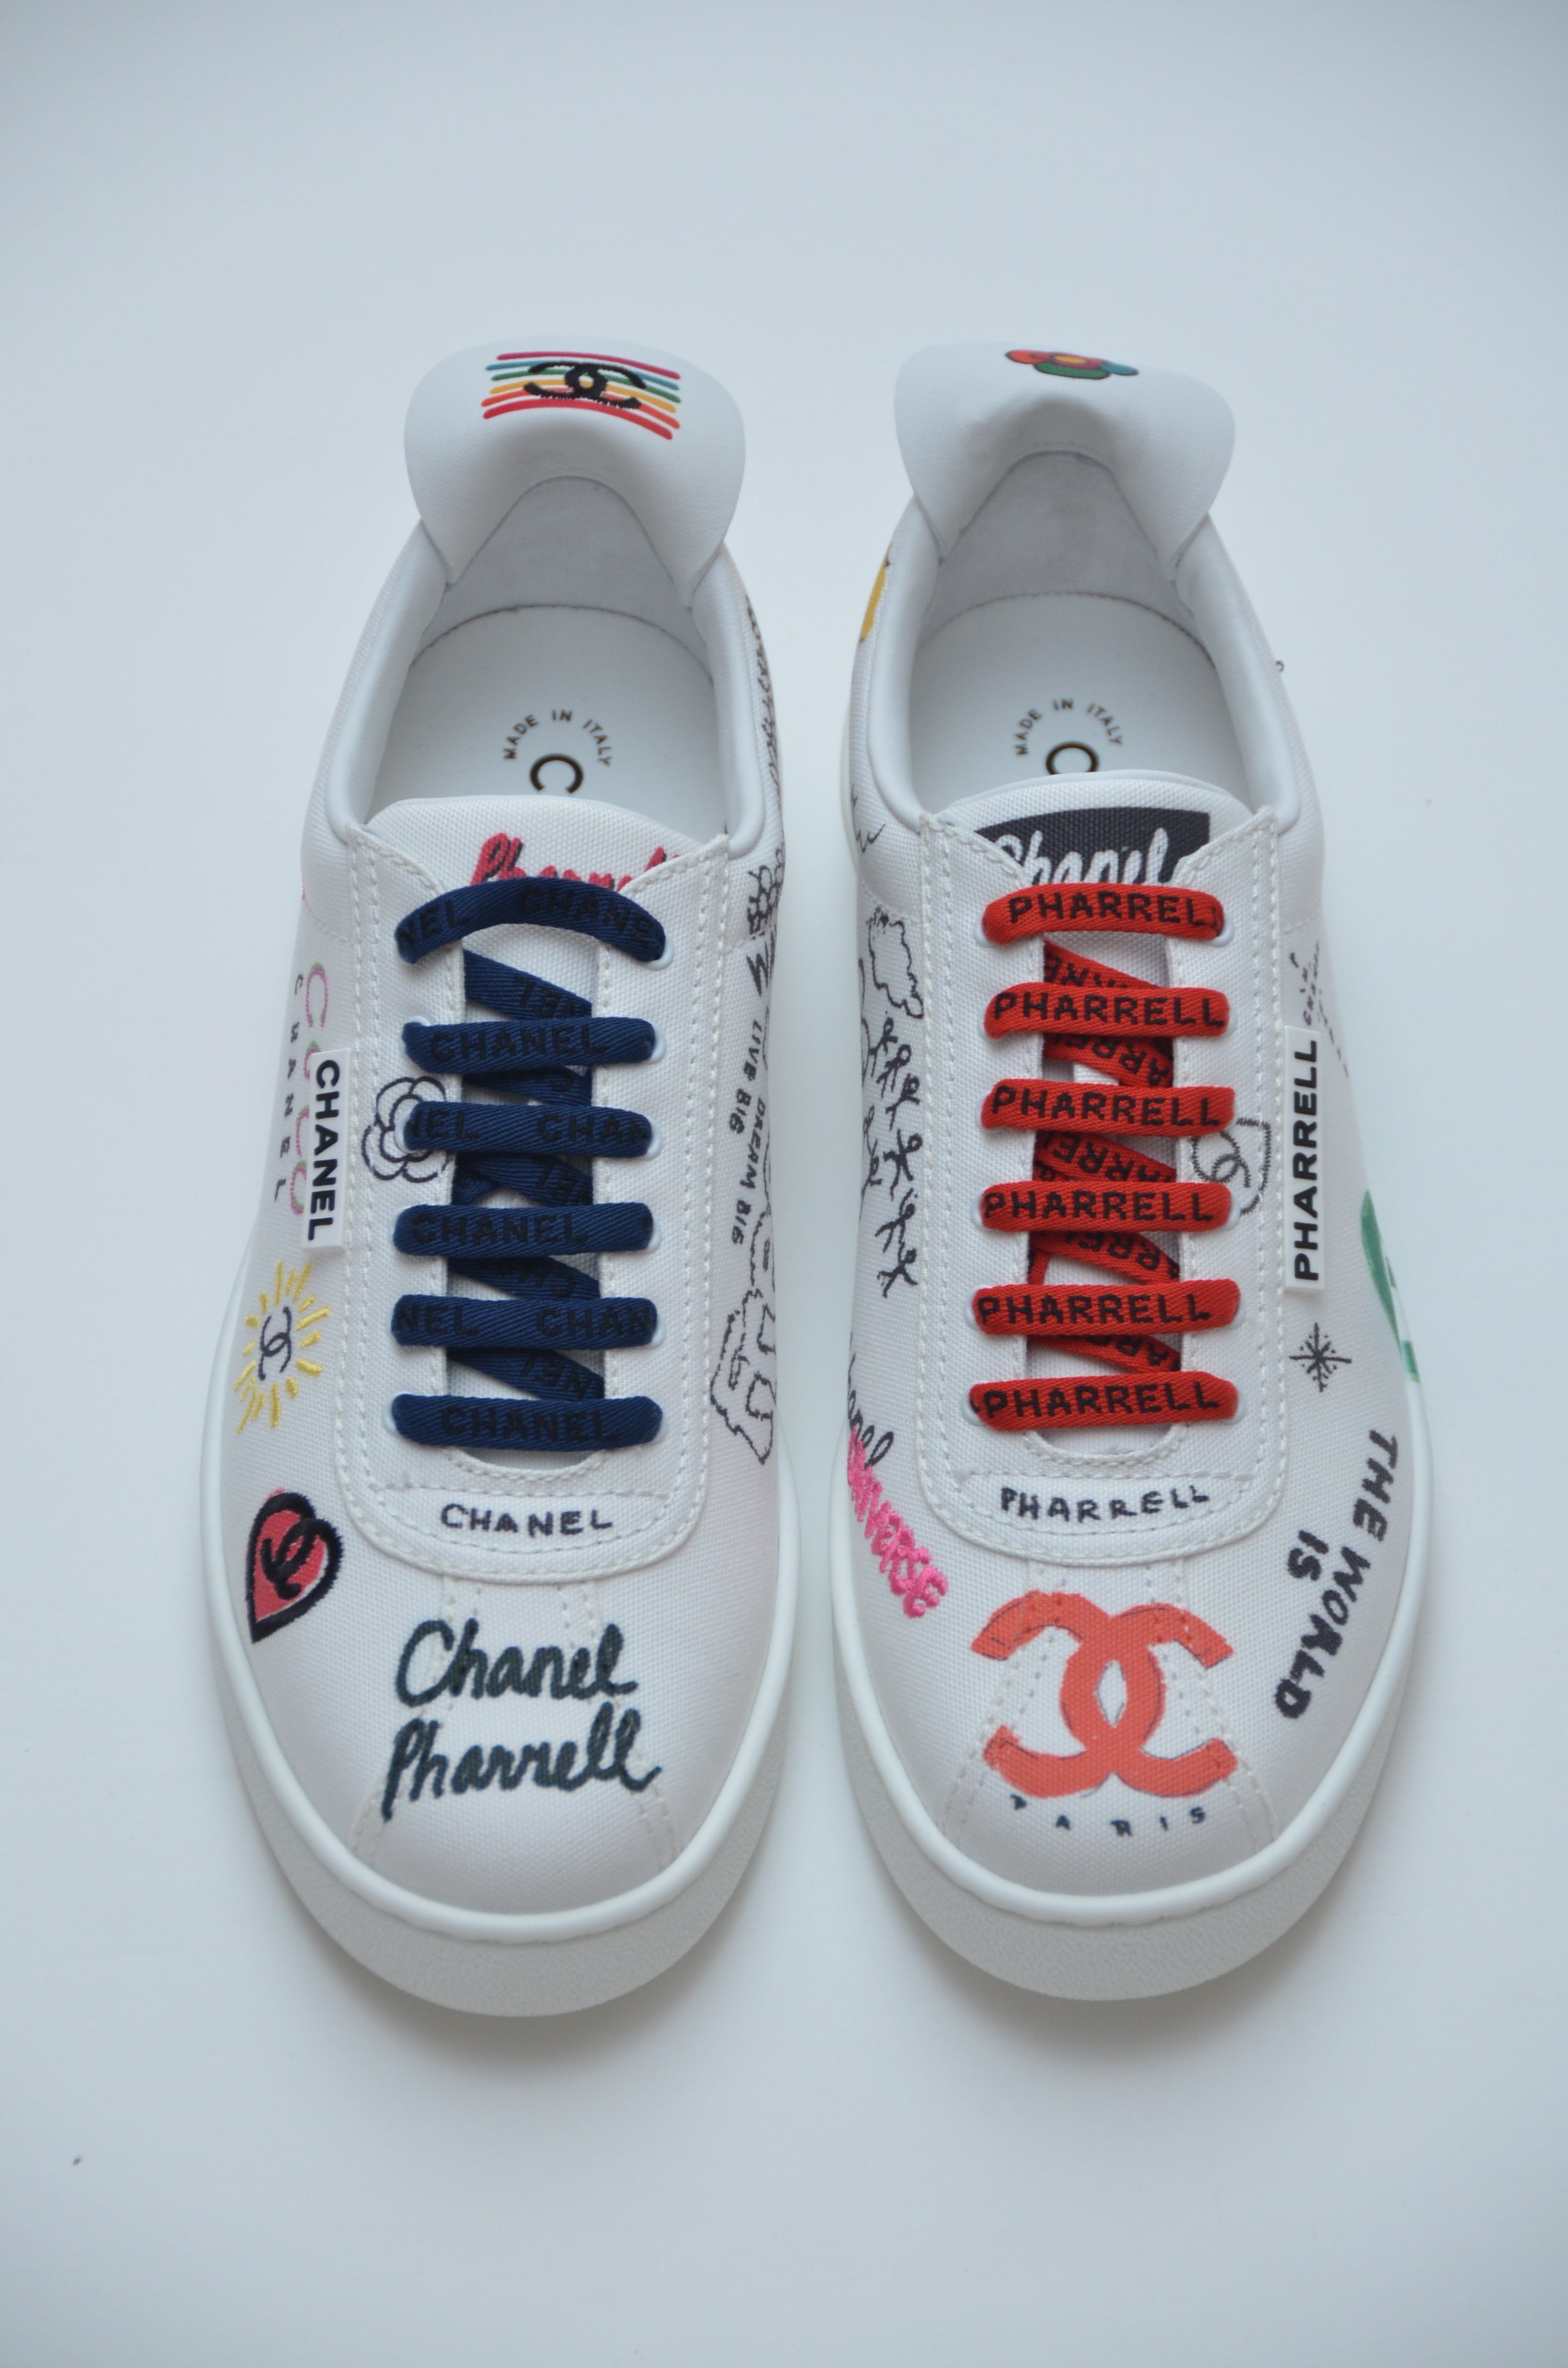 pharrell chanel shoes price